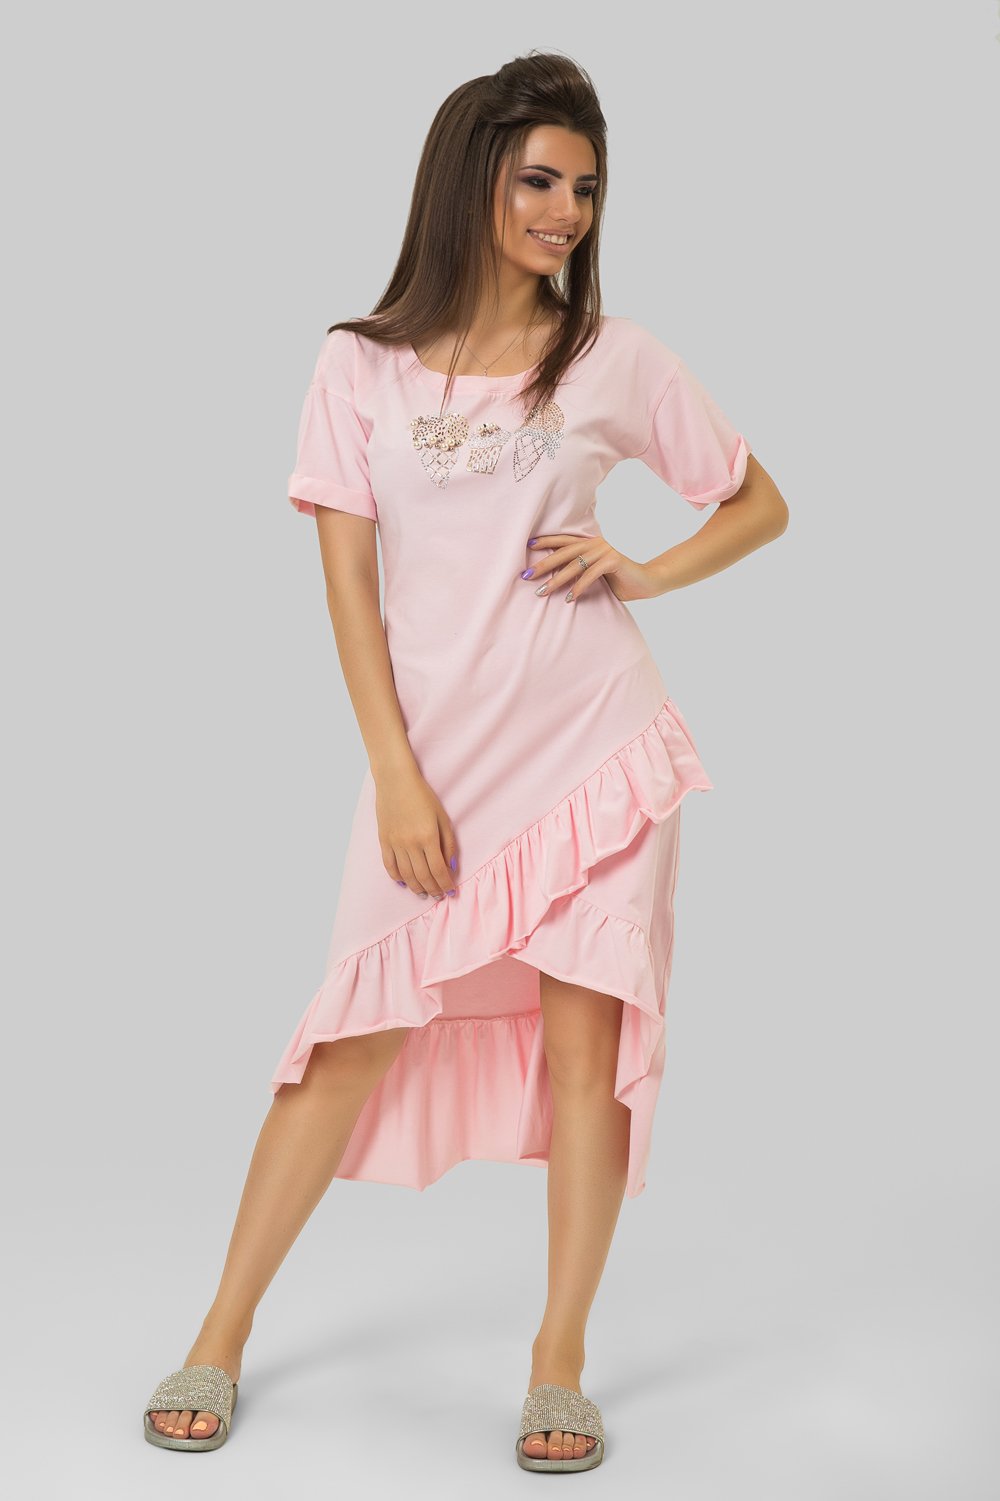 Pink knitted dress with ruffle at the bottom